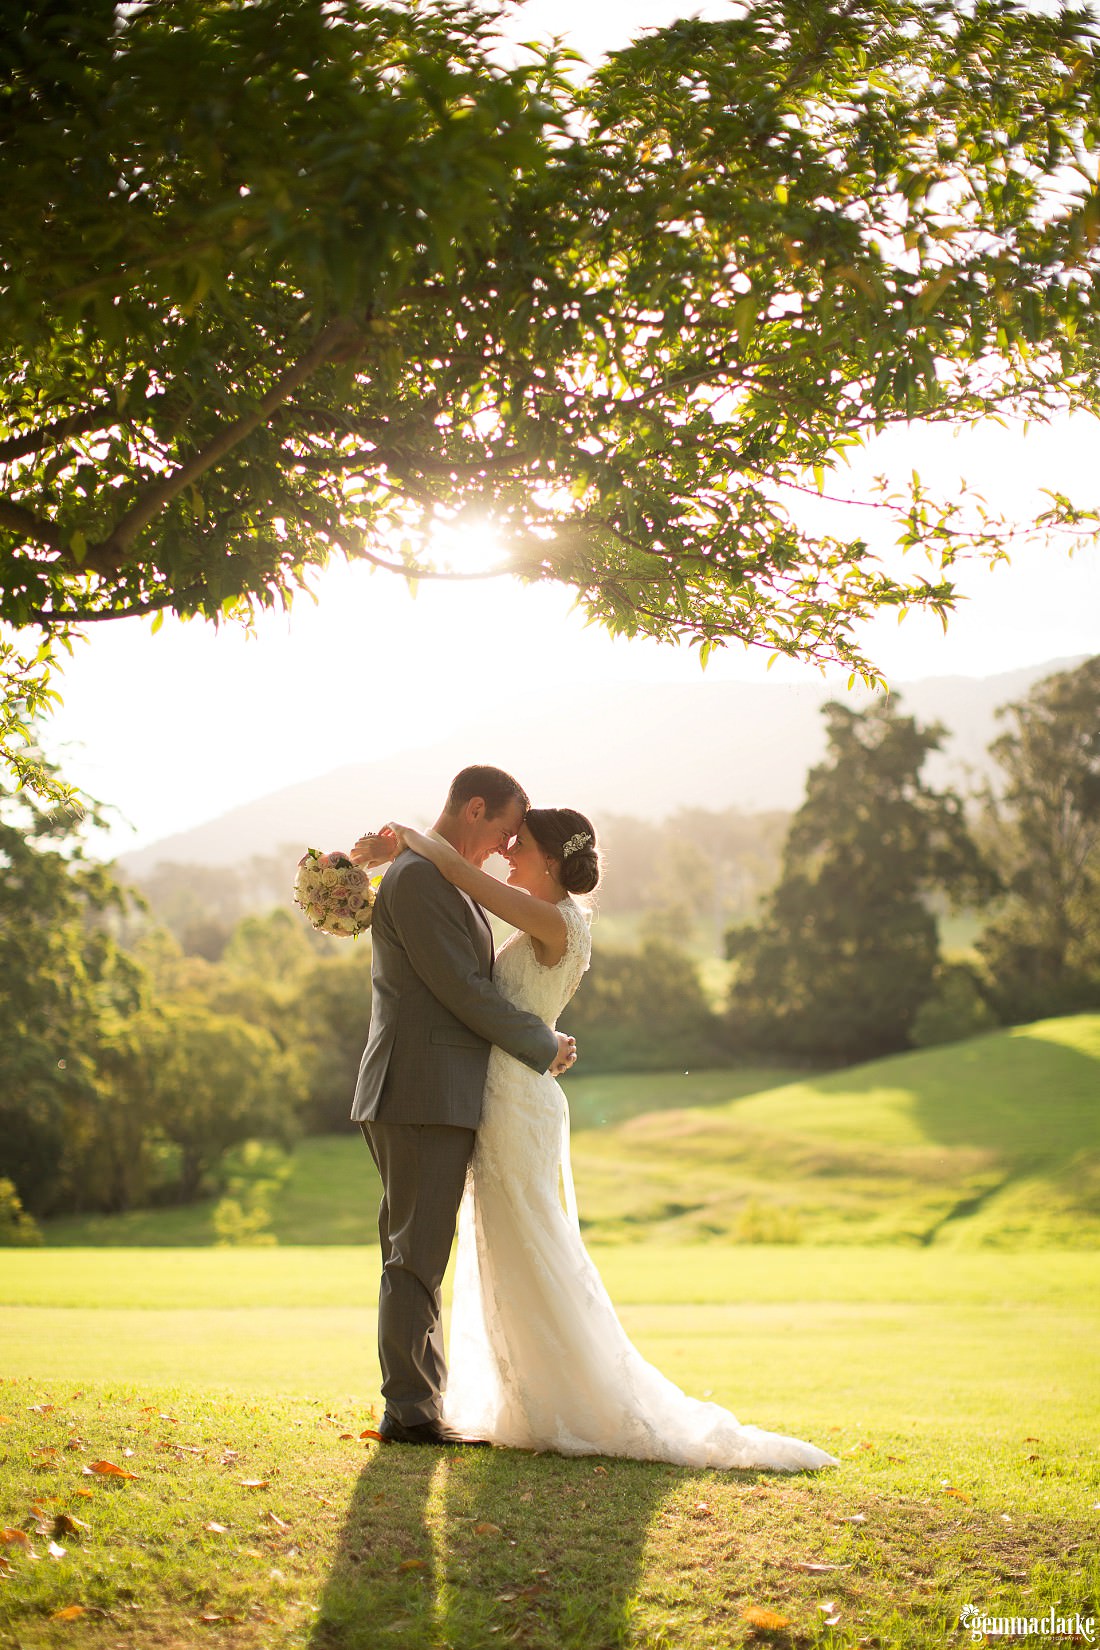 Magical sunset photos with the bride and groom hugging and looking into each other's eyes. There is an overhanging tree and the mountains in the background at this Silos Estate Wedding